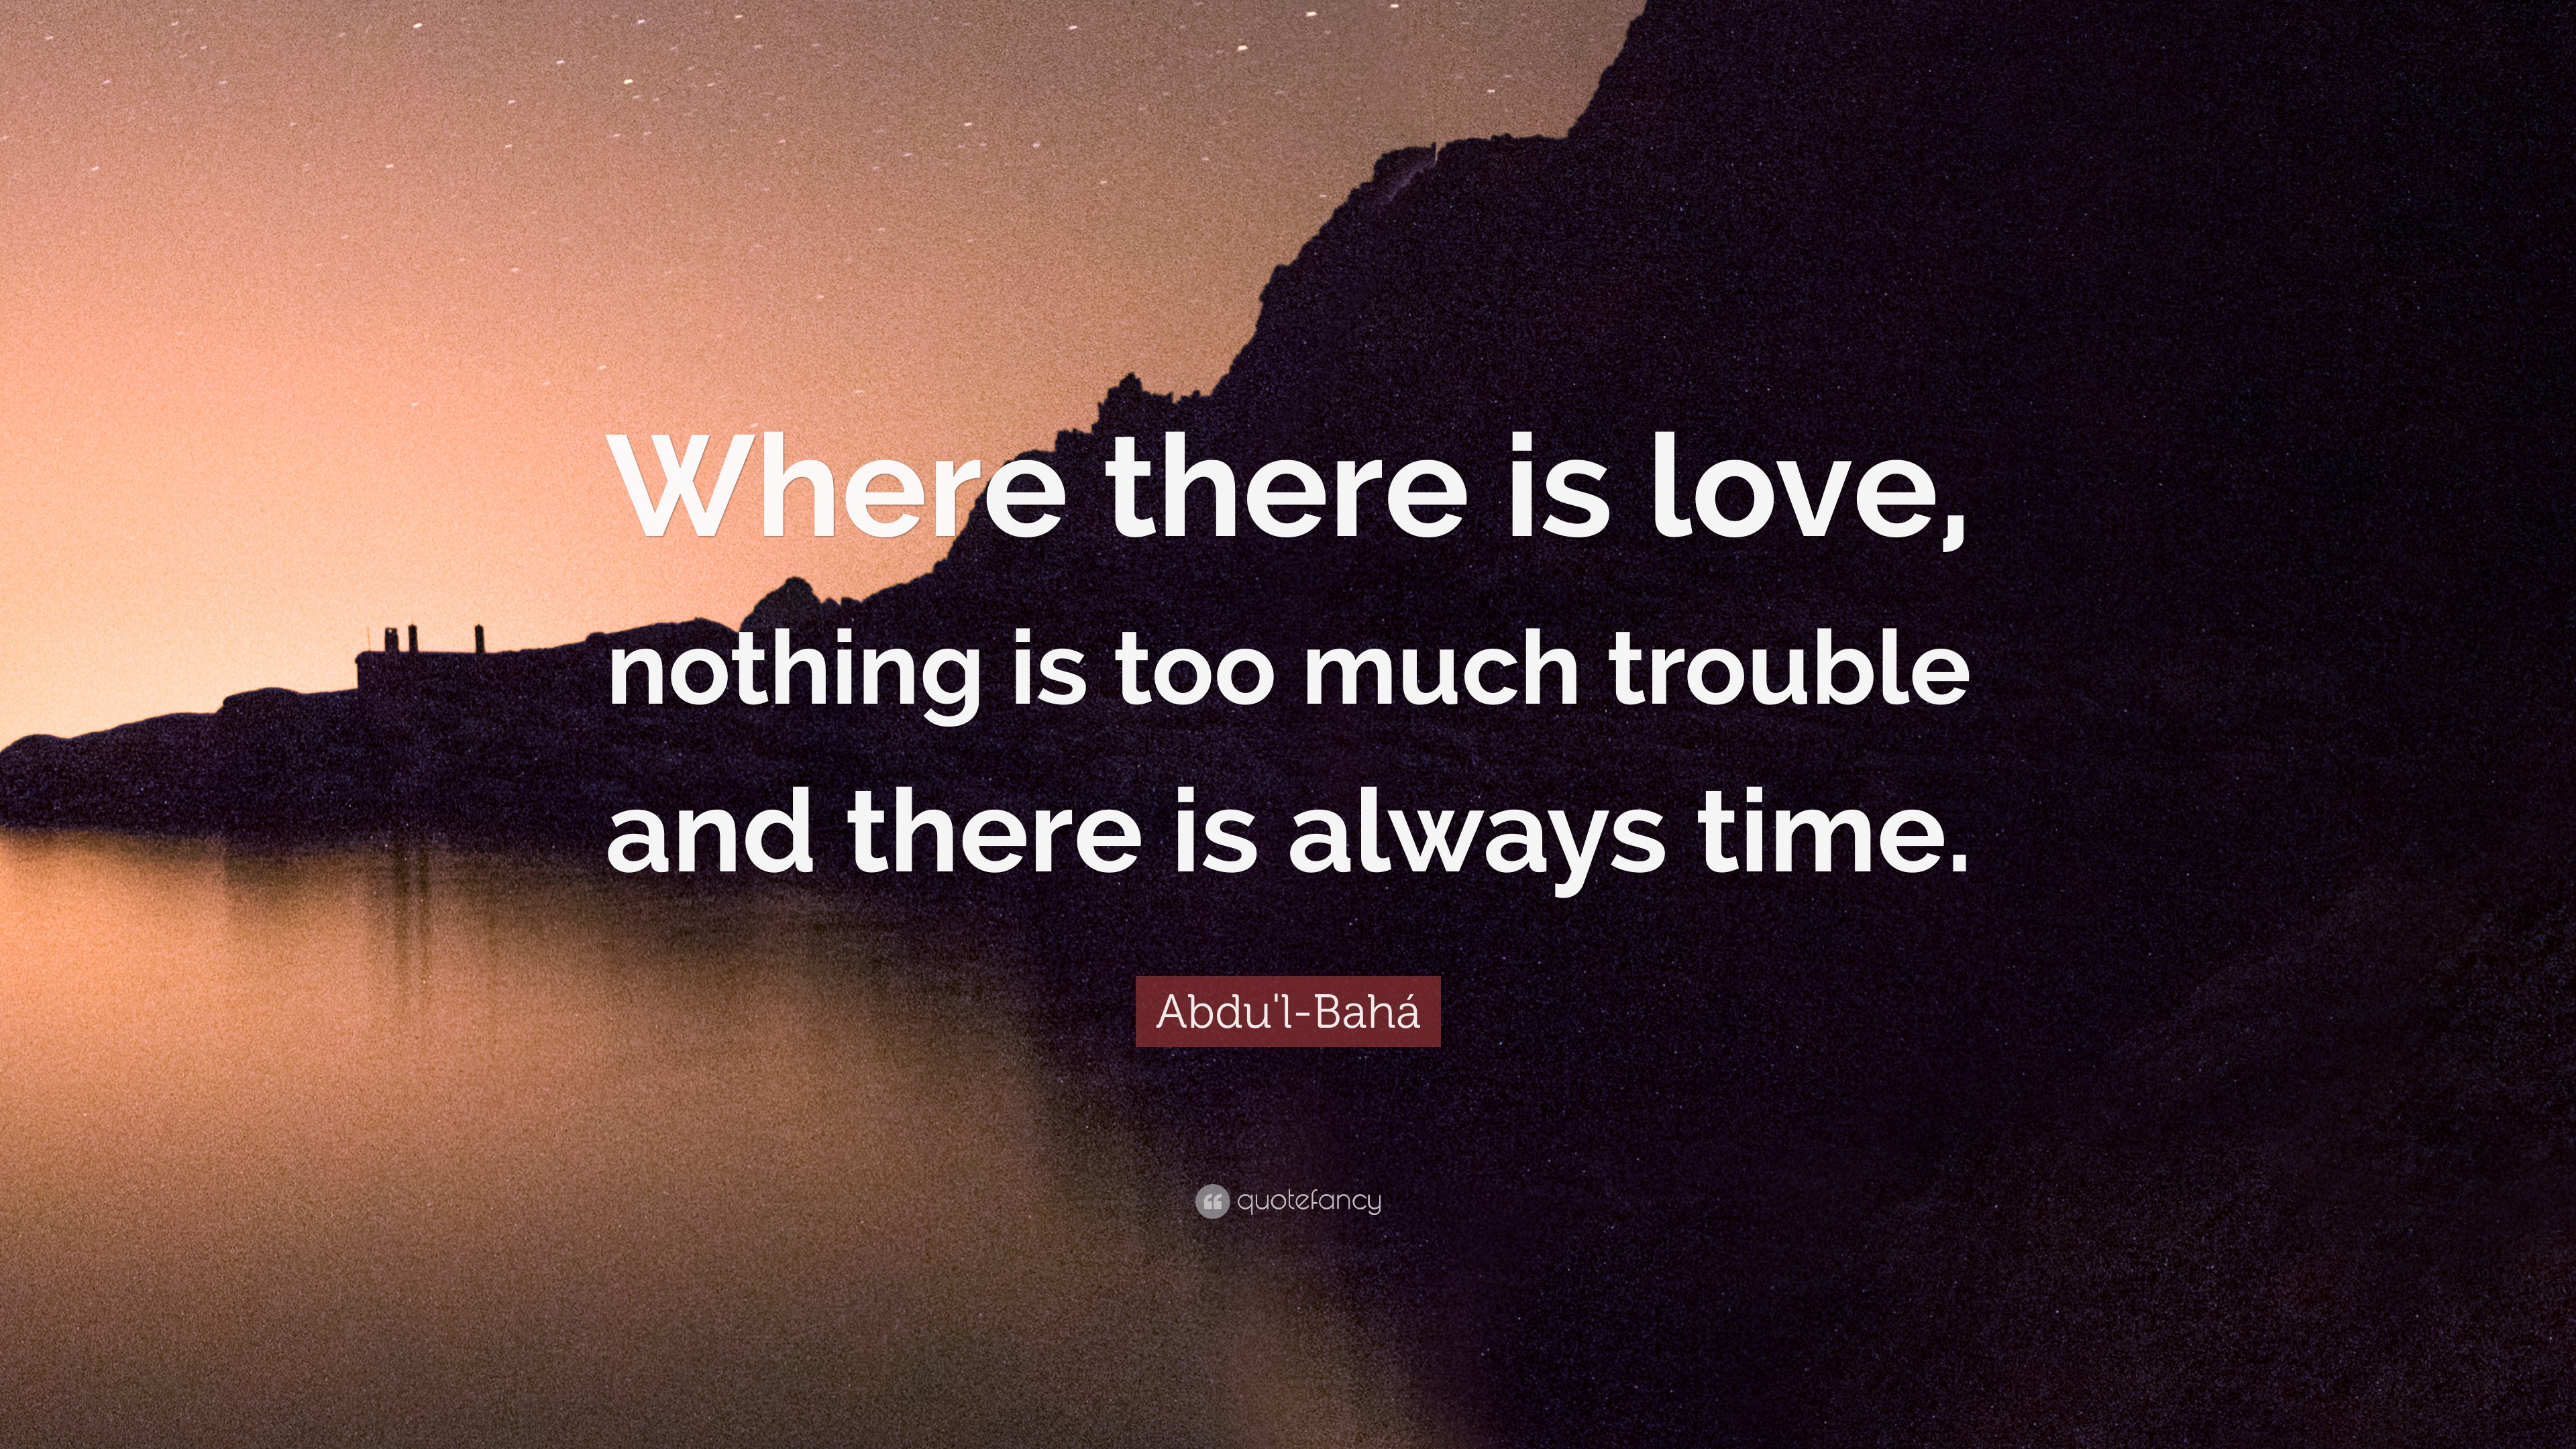 Abdu l Bahá Quote “Where there is love nothing is too